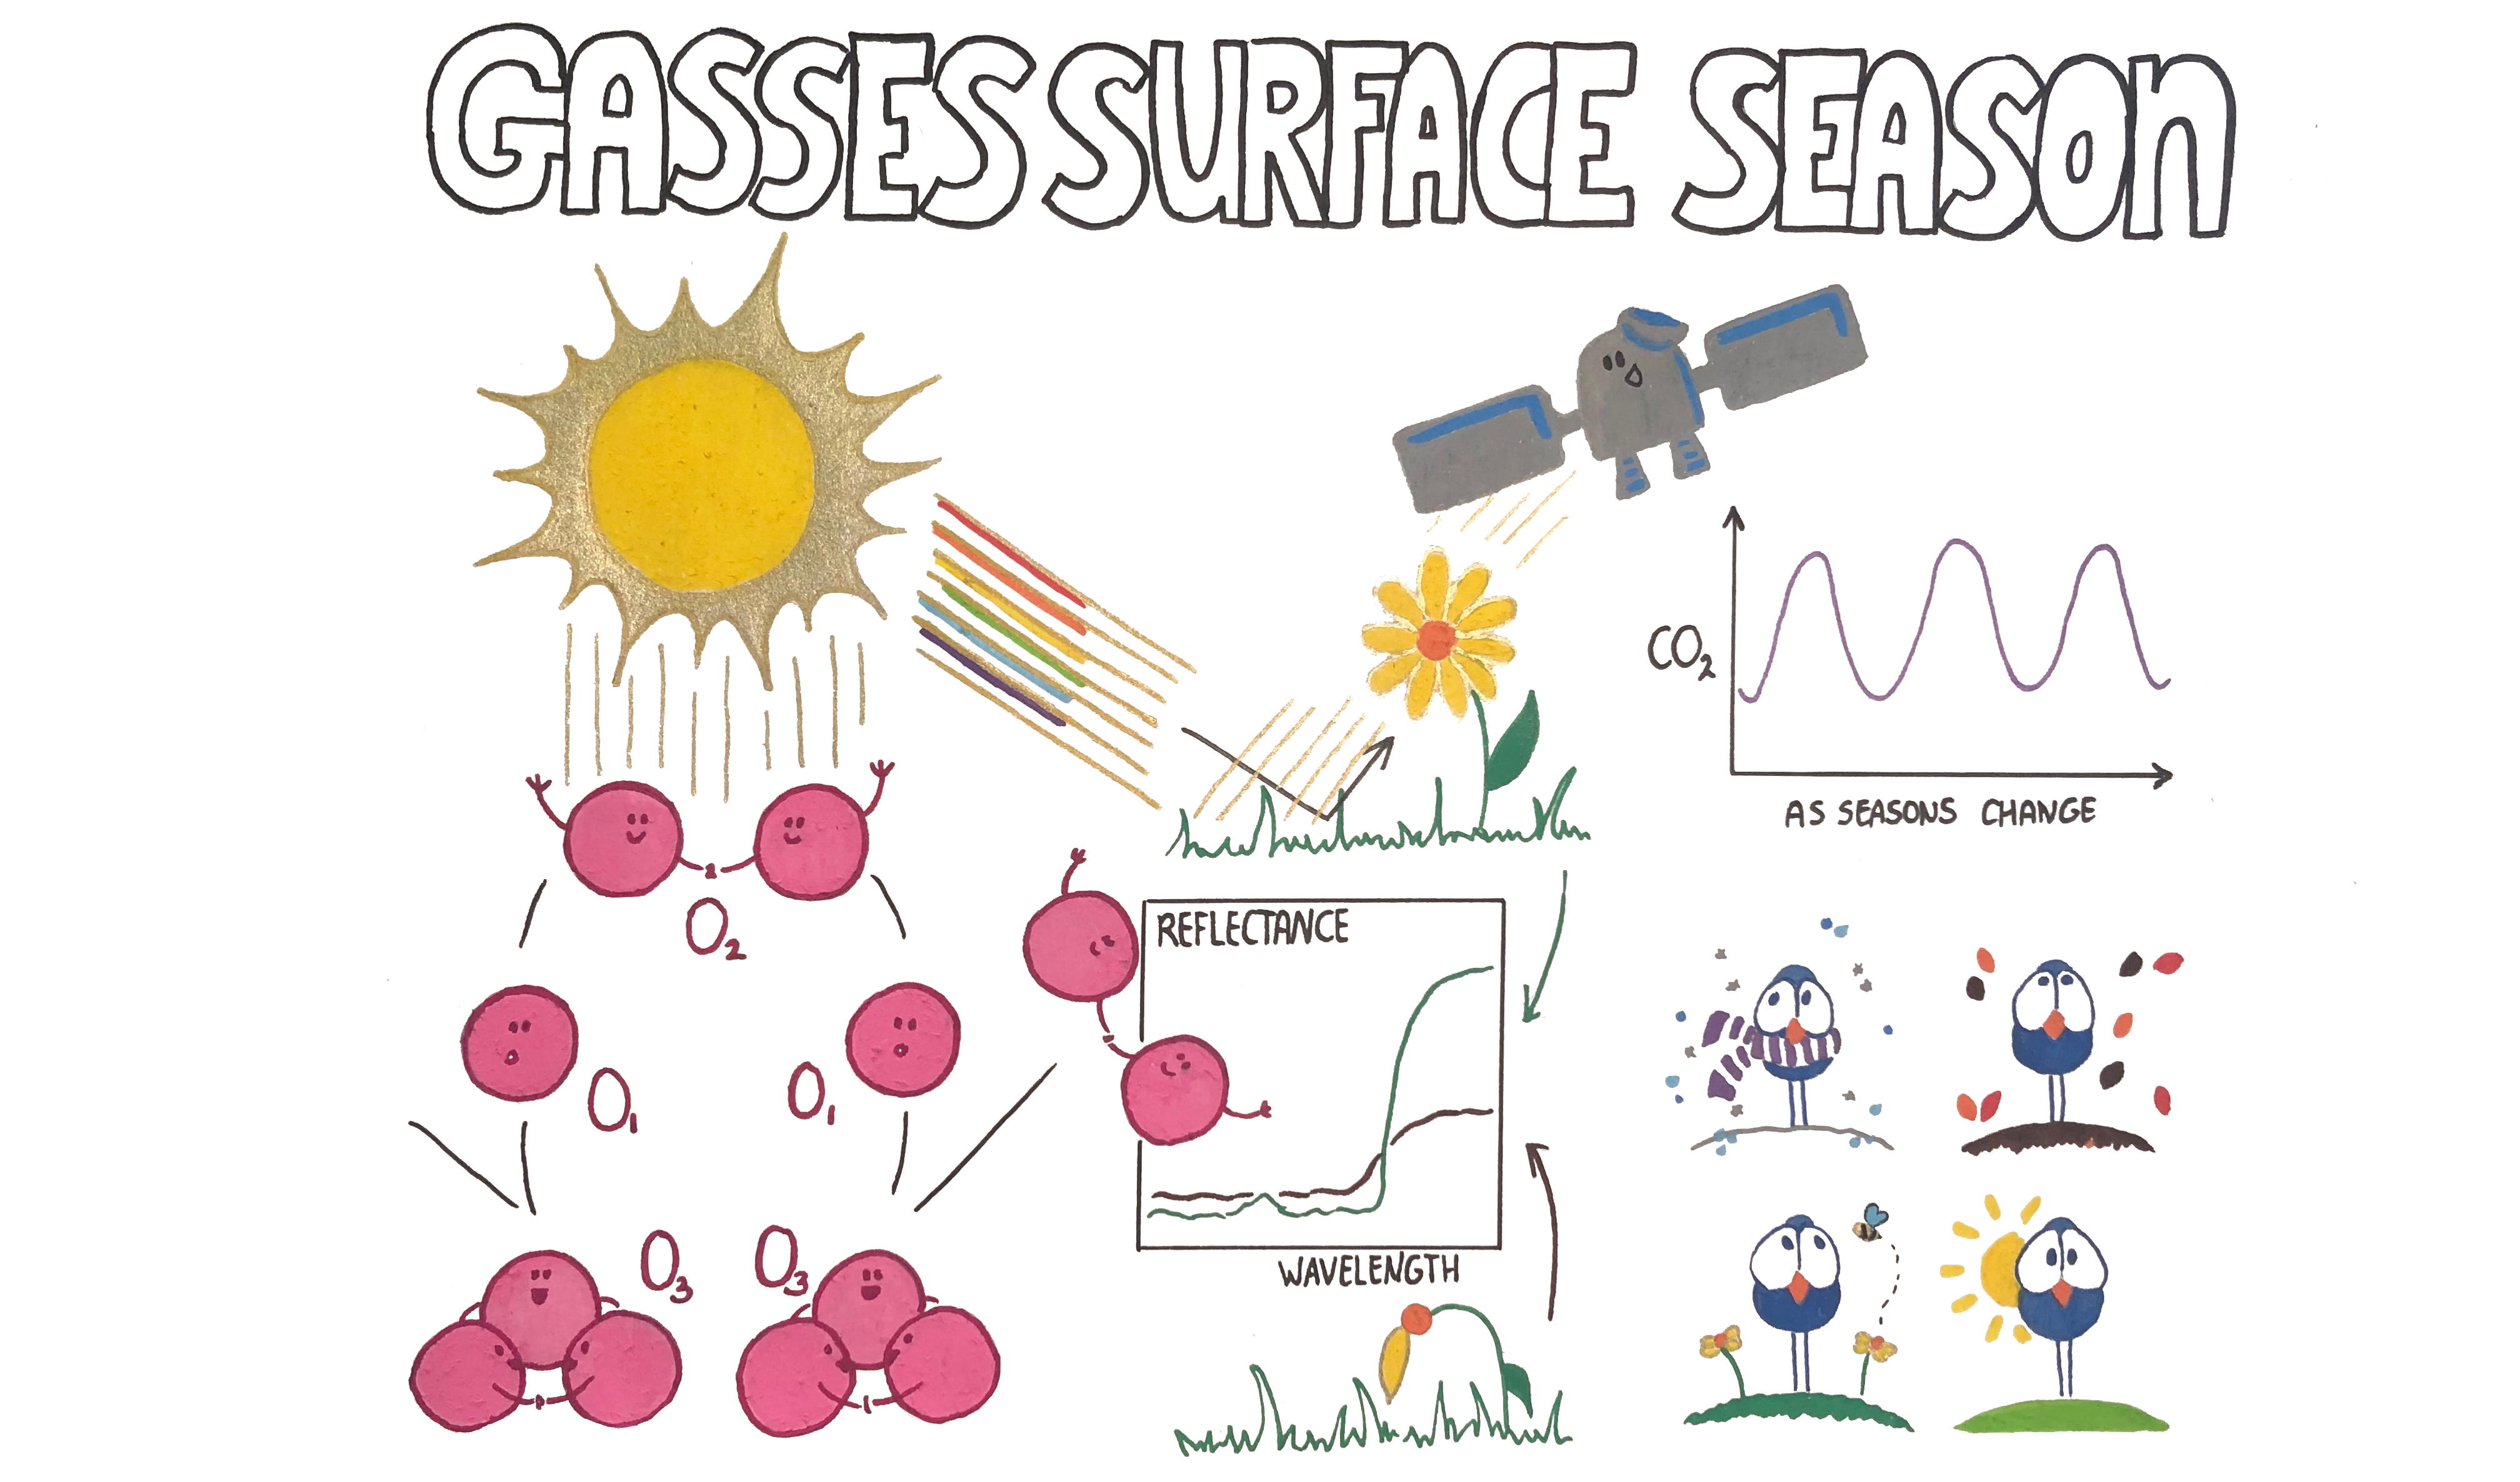 Biomarkers in atmosphere on surface and through seasons